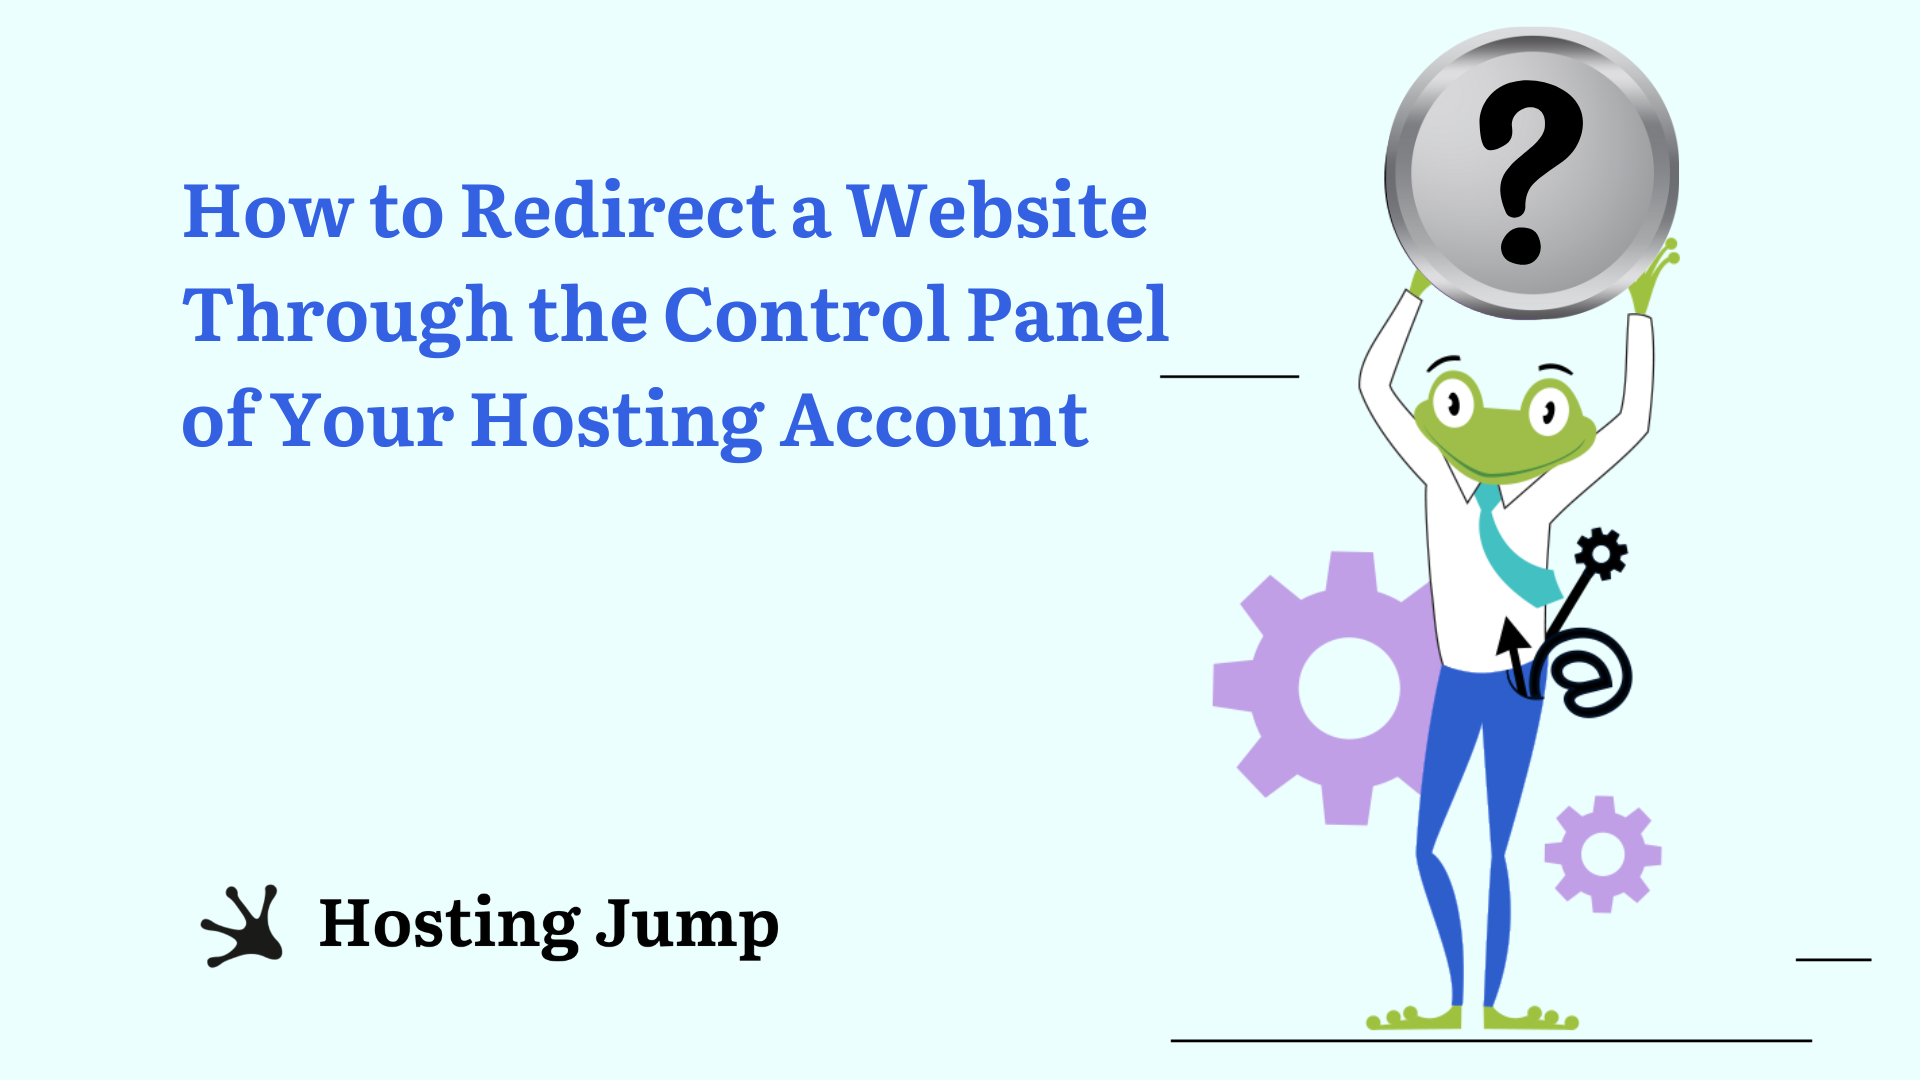 How to Redirect a Website Through the Control Panel of Your Hosting Account